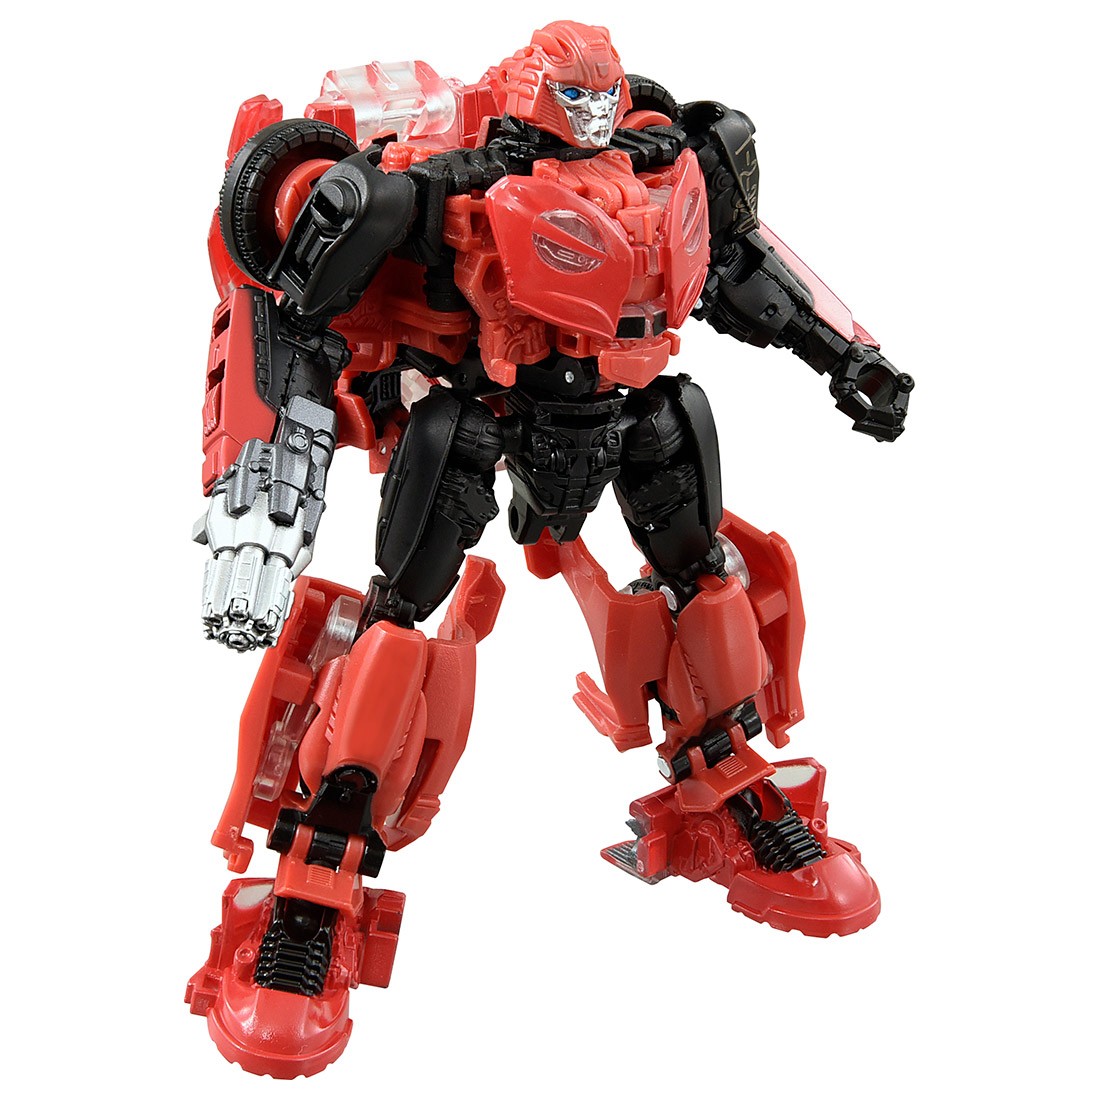 Transformers News: Takara Tomy Mall Shares New Photos of SS 53 Bumblebee Movie Cliffjumper and SS 54 RotF Overload